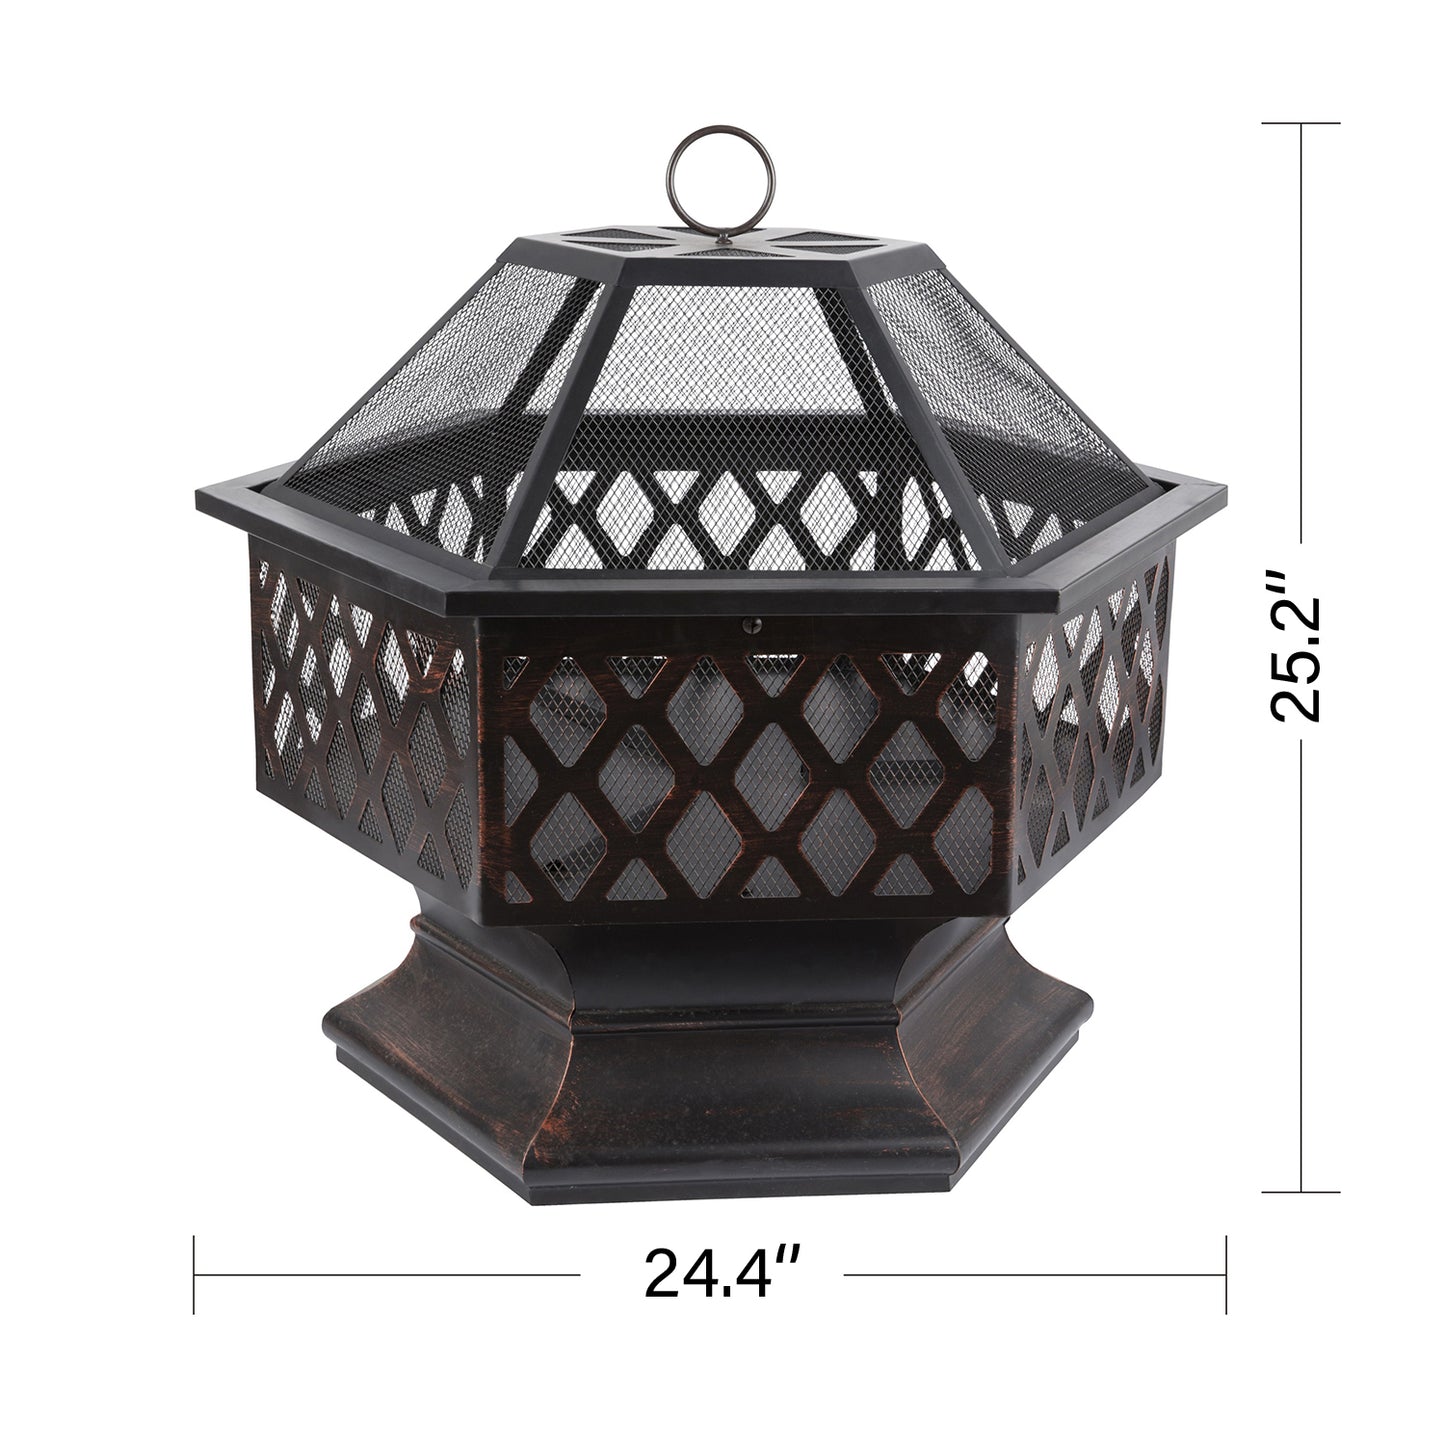 24.4'' Black Iron Outdoor Fire Pit